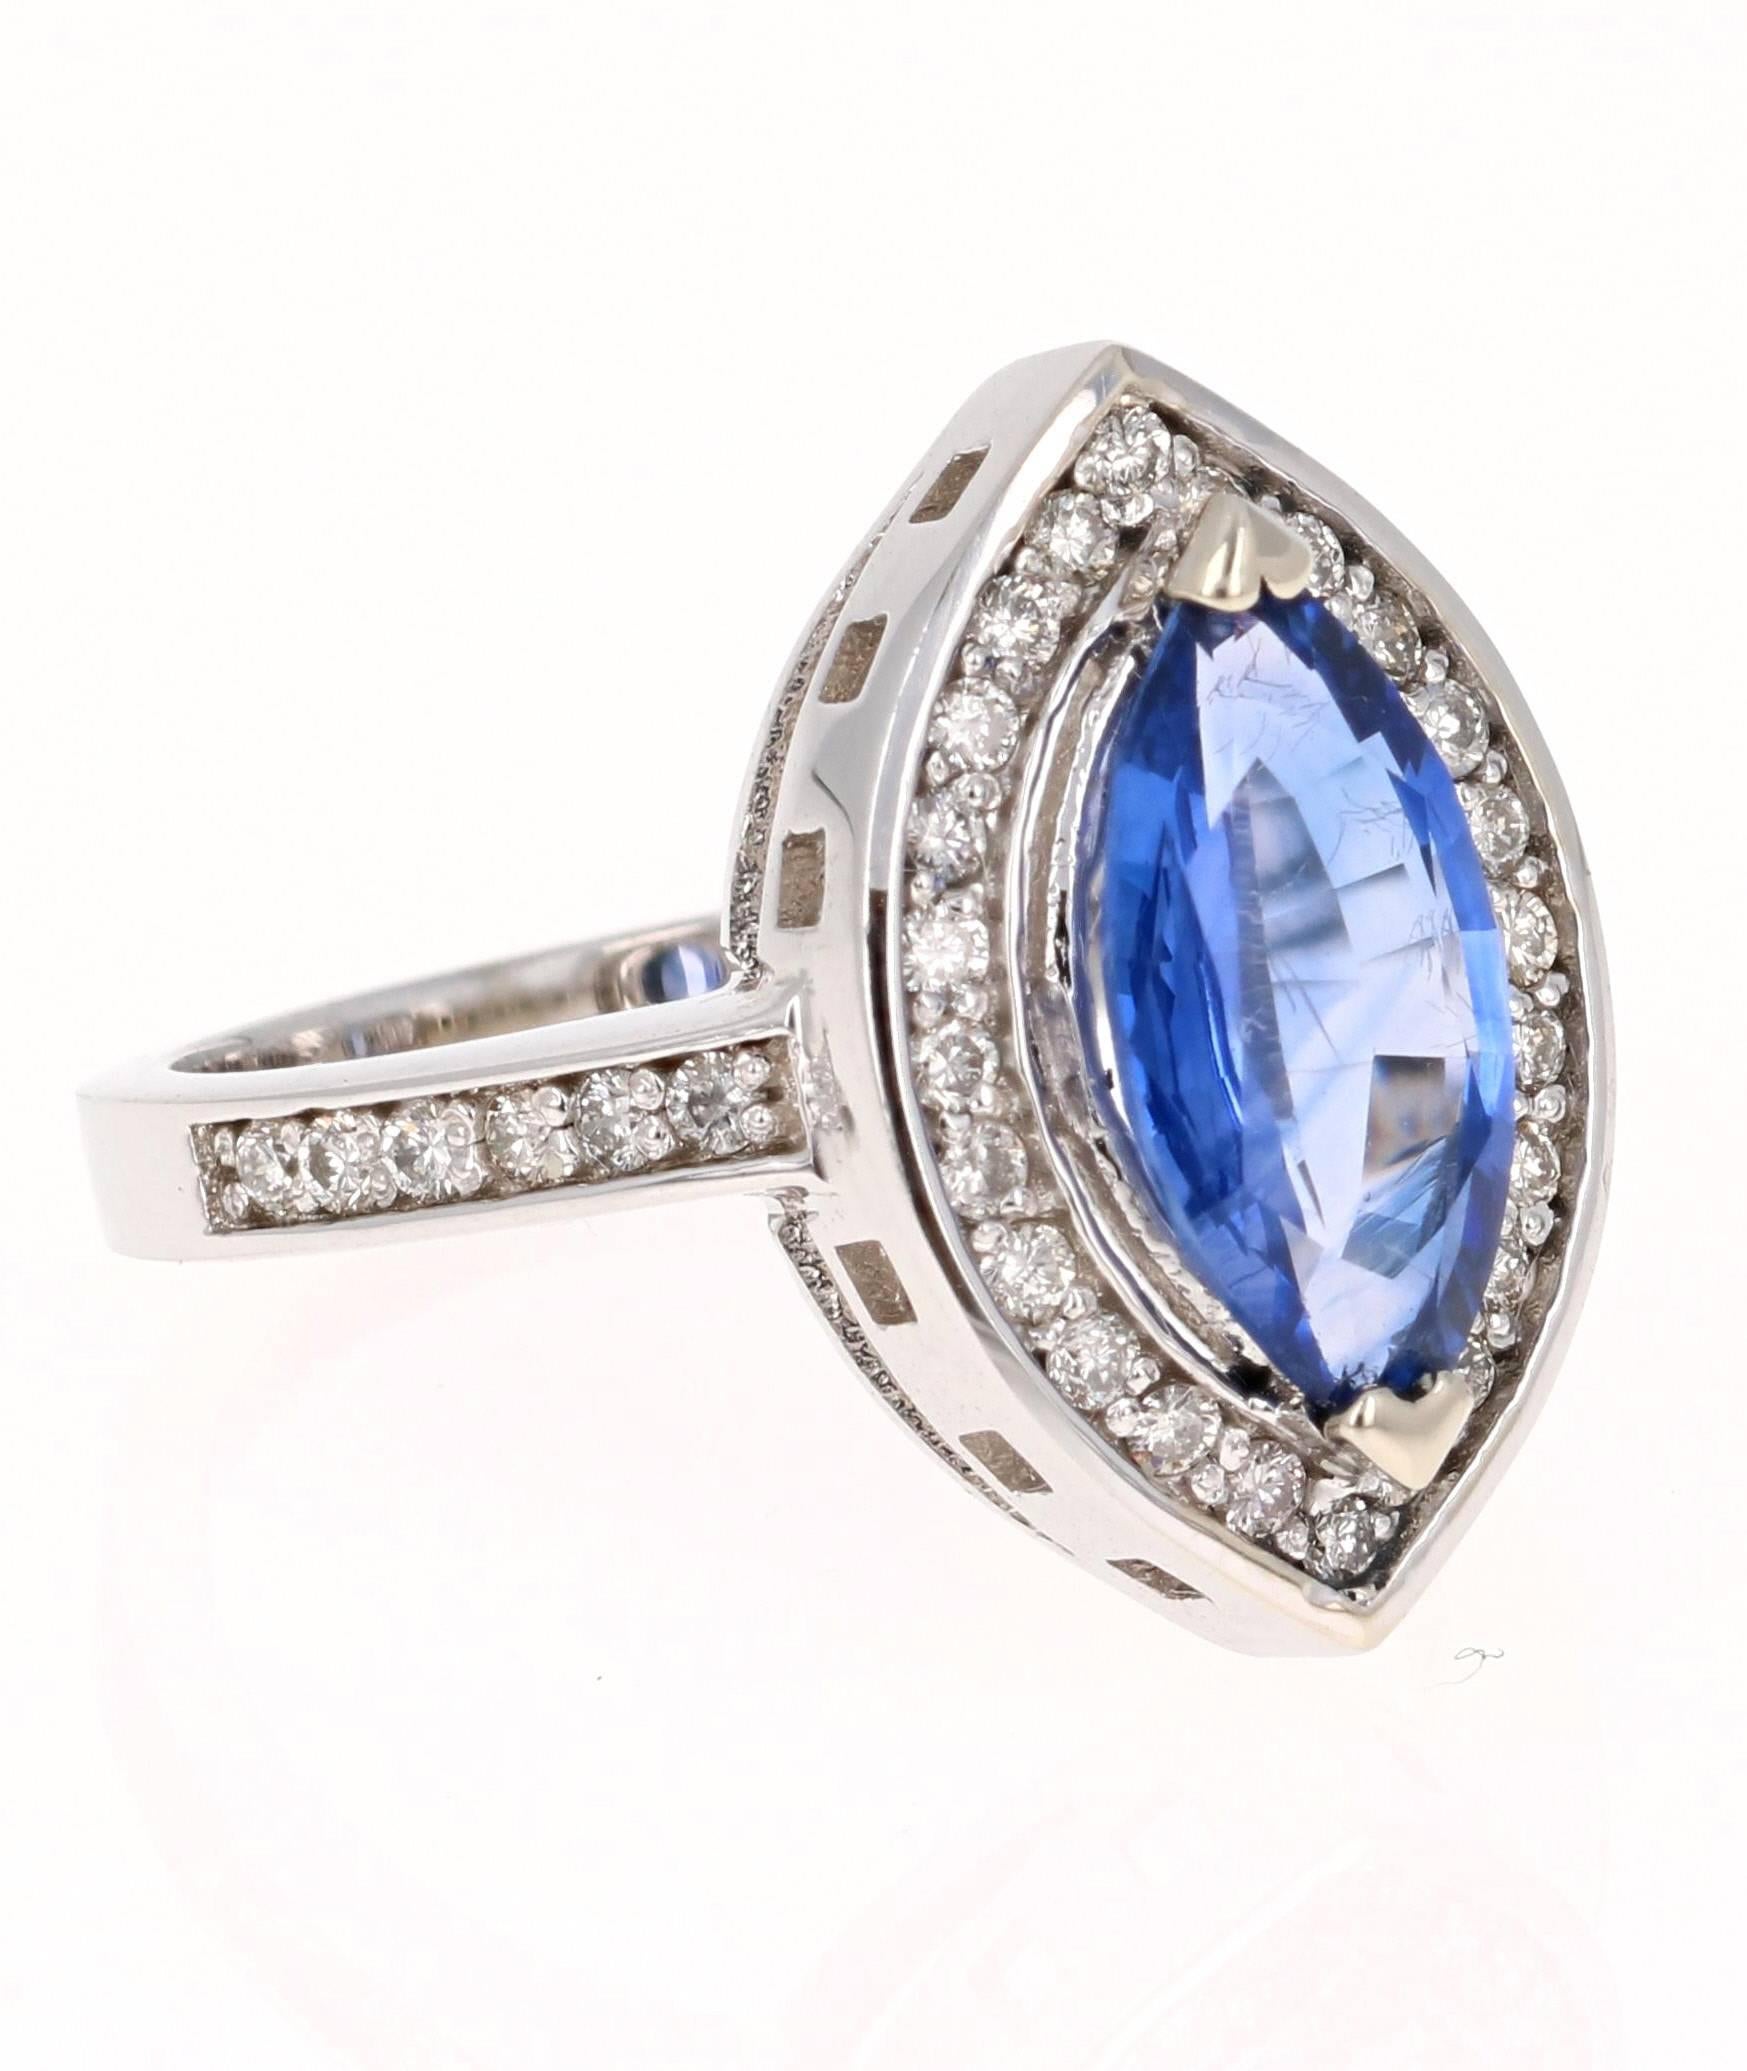 This unique Tanzanite Diamond Ring has a stunning 1.89 Carat Marquise Cut Tanzanite as its center stone and has 36 Round Cut Diamonds that weigh 0.35 Carats. The setting is simply beautiful and is perfect for somebody looking to own a one of a kind